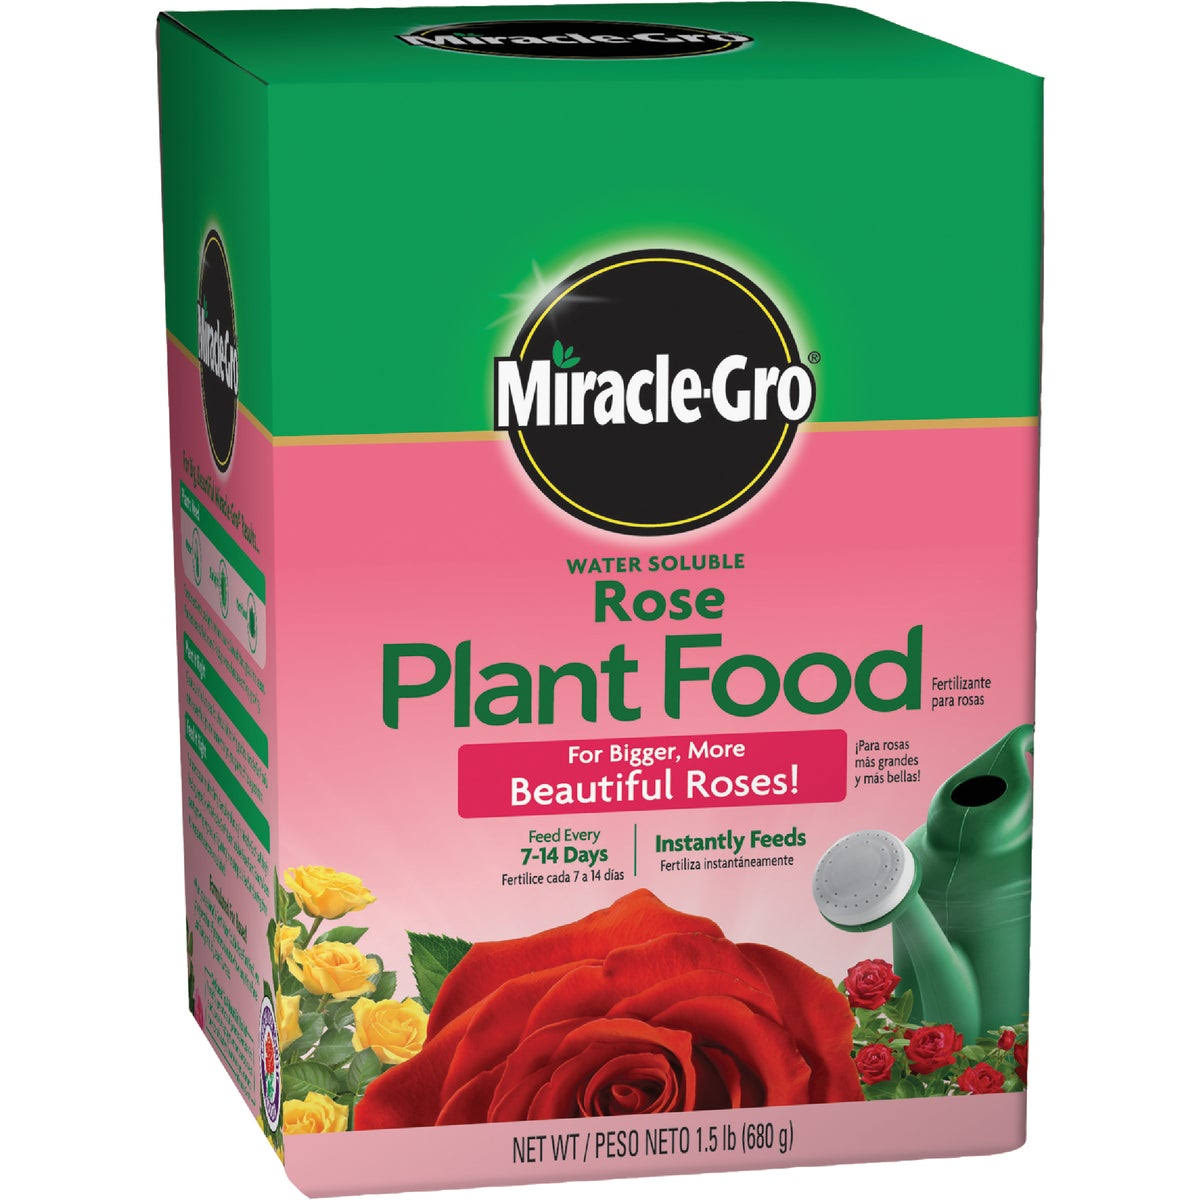 Miracle-Gro Water Soluble Rose Plant Food - 680g